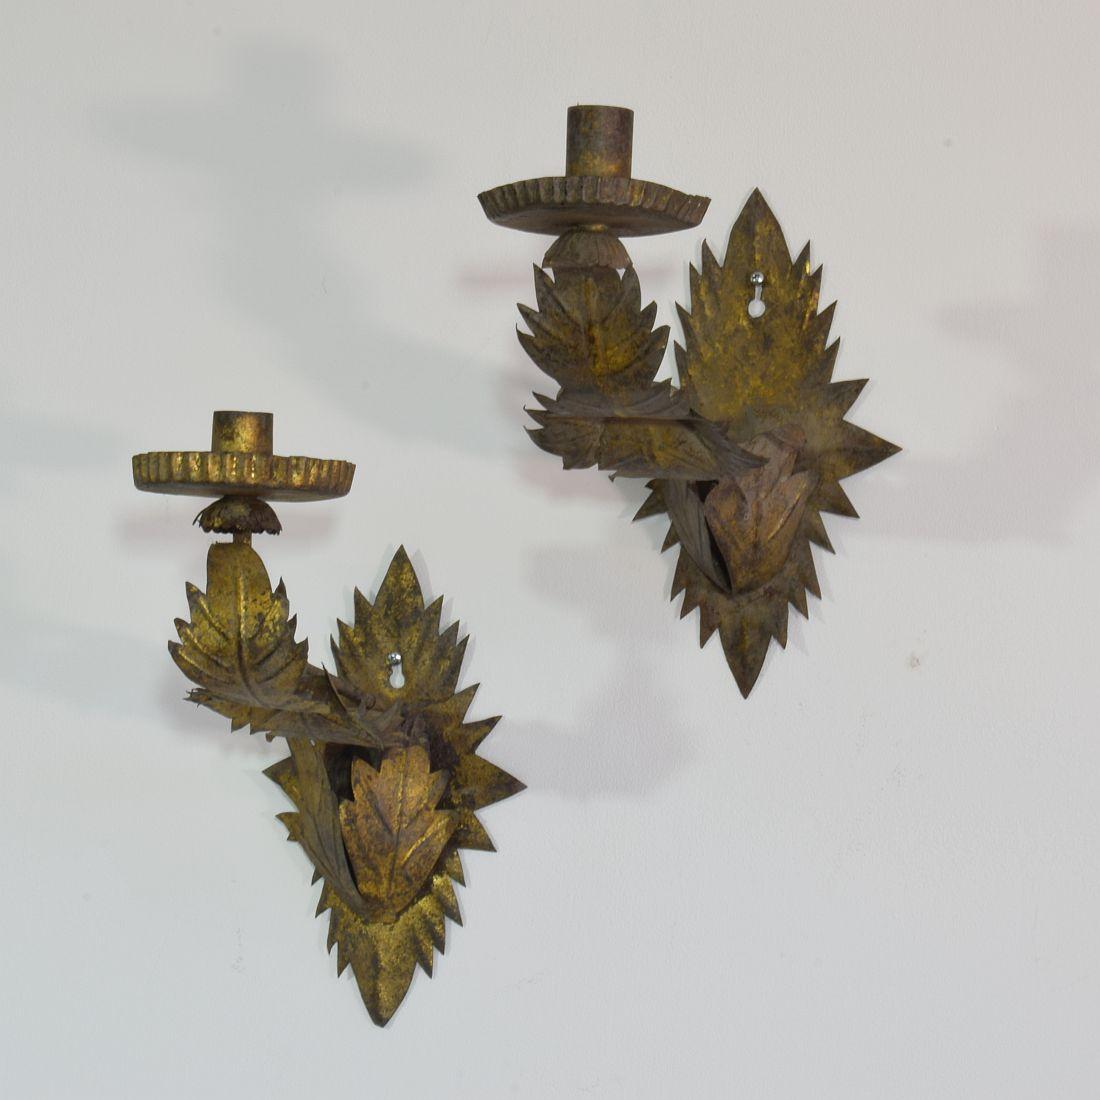 Iron Couple of Early 20th Century Spanish Gilded Metal Wall Candleholders / Sconces